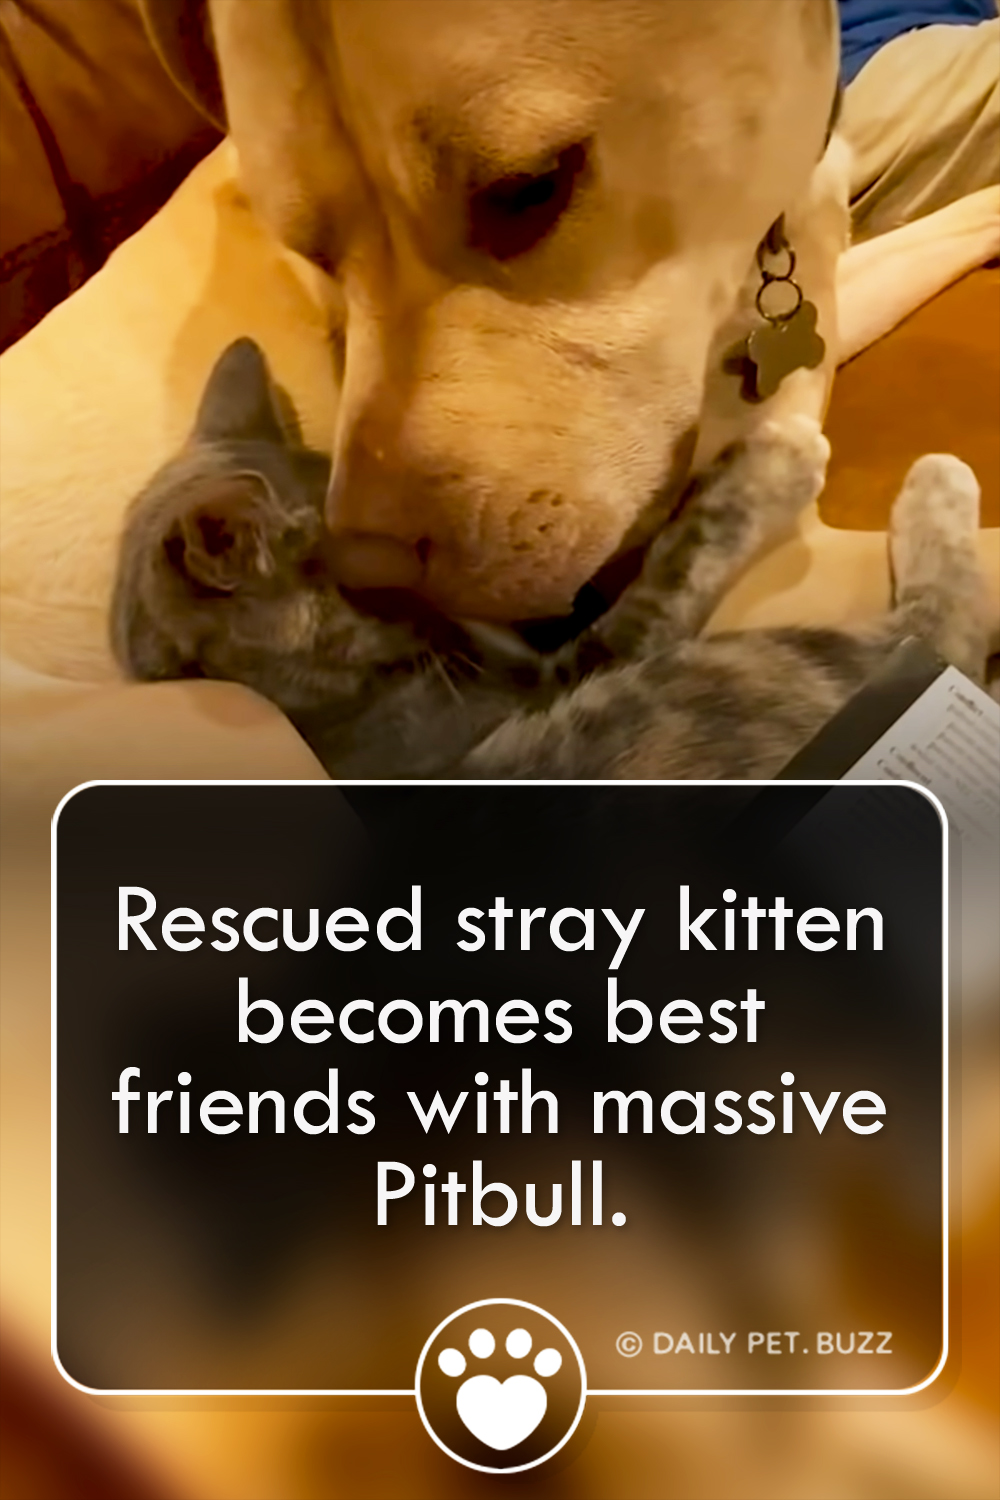 Rescued stray kitten becomes best friends with massive Pitbull.